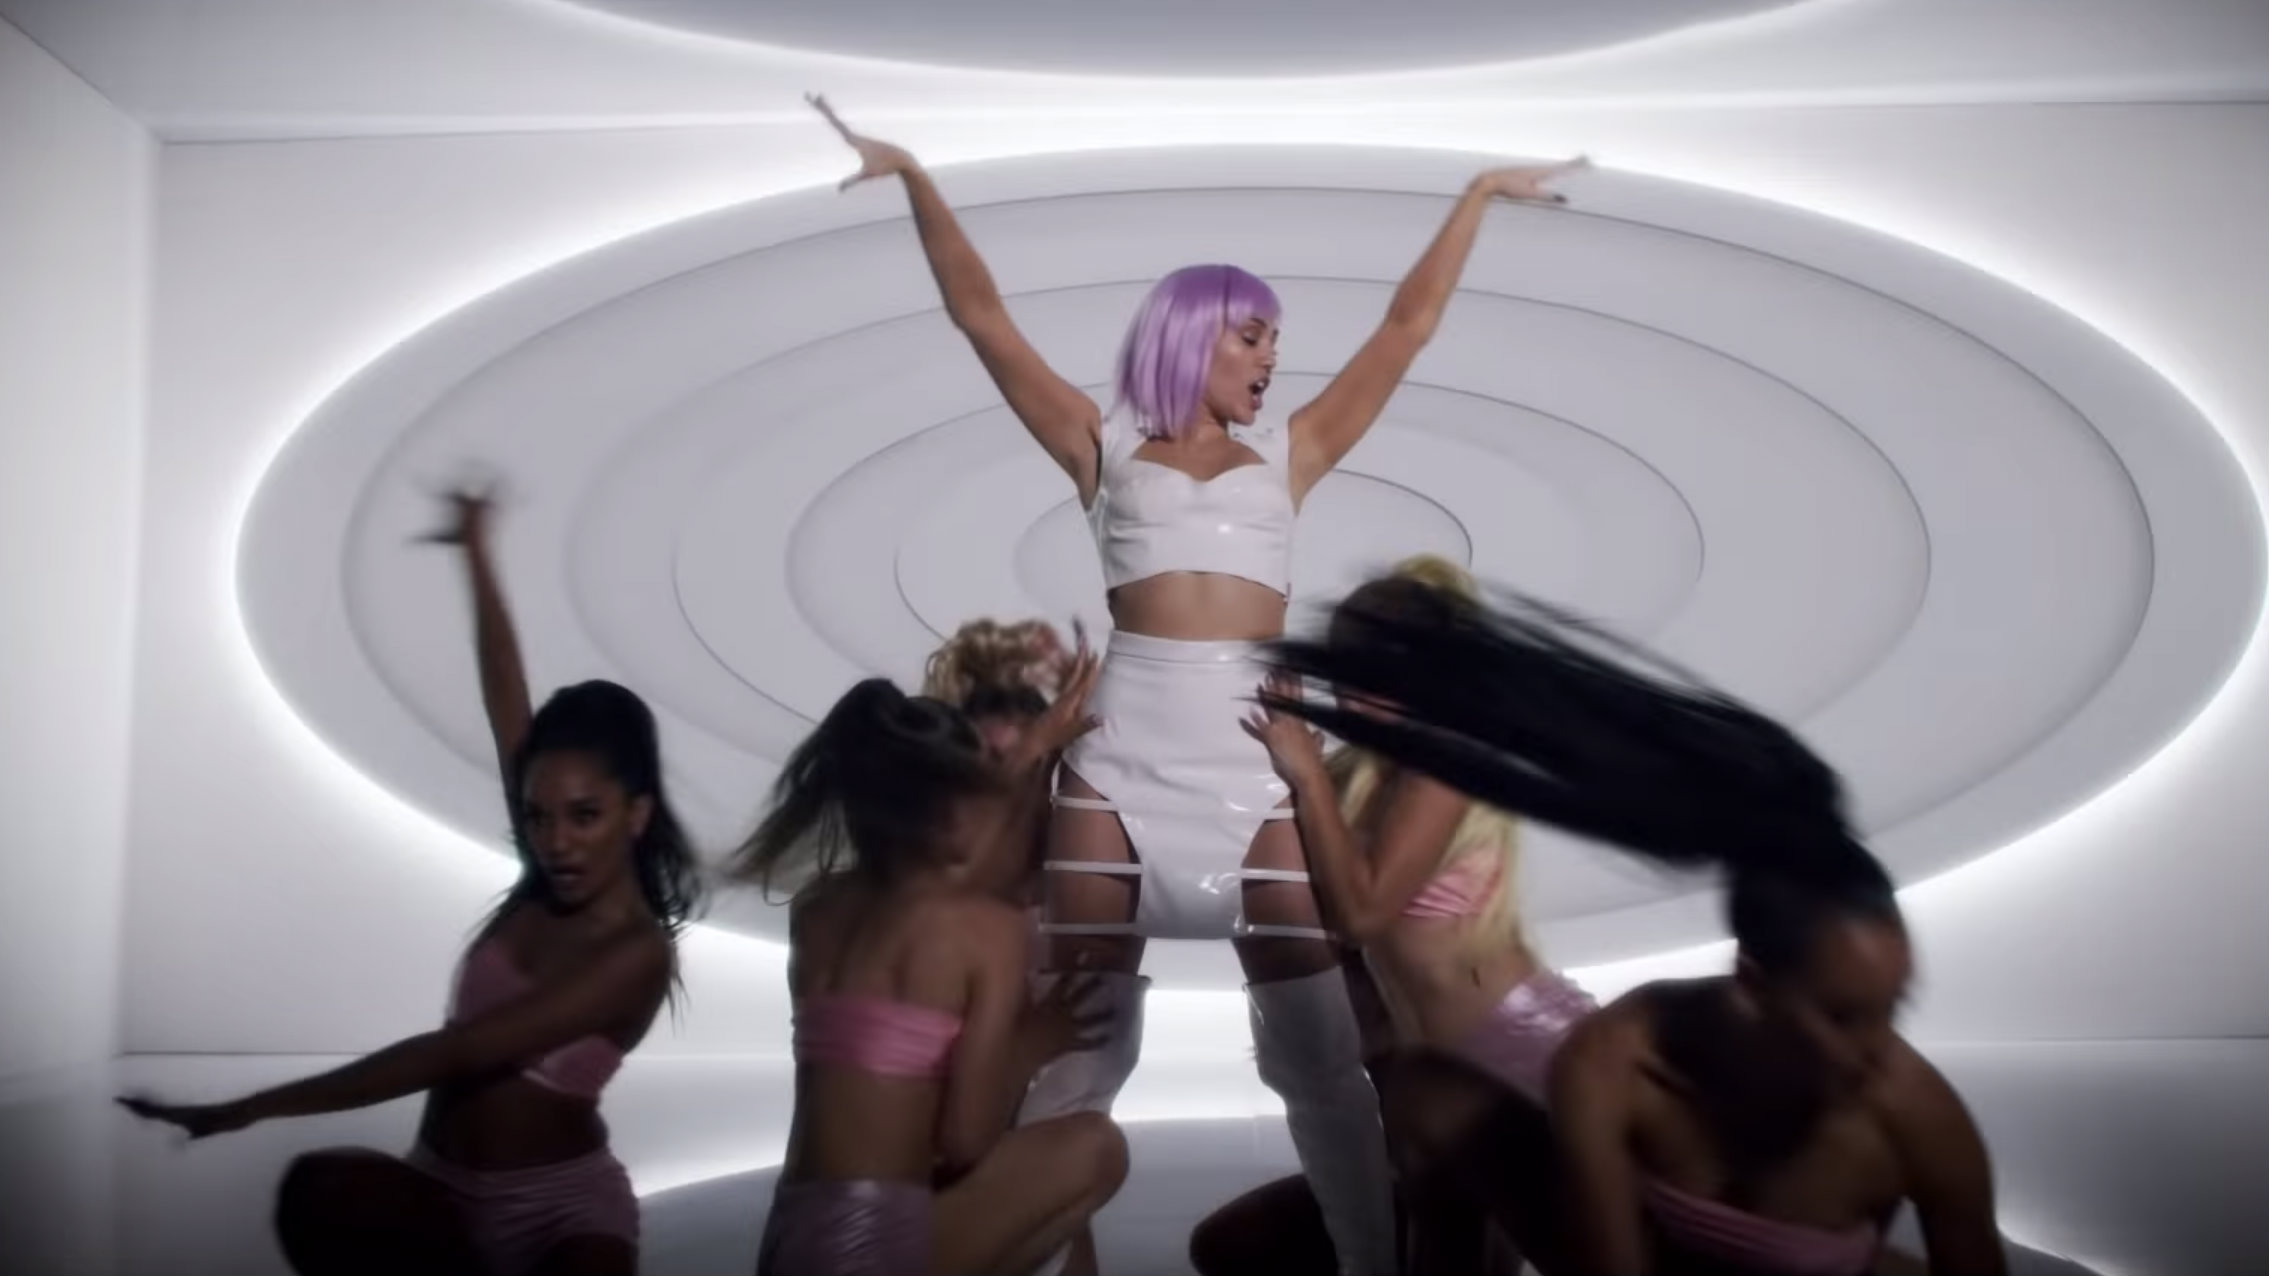 Ashley O's Music Video Looks Like a Target Commercial Before Showing Cracks  in the Veneer | Culled Culture